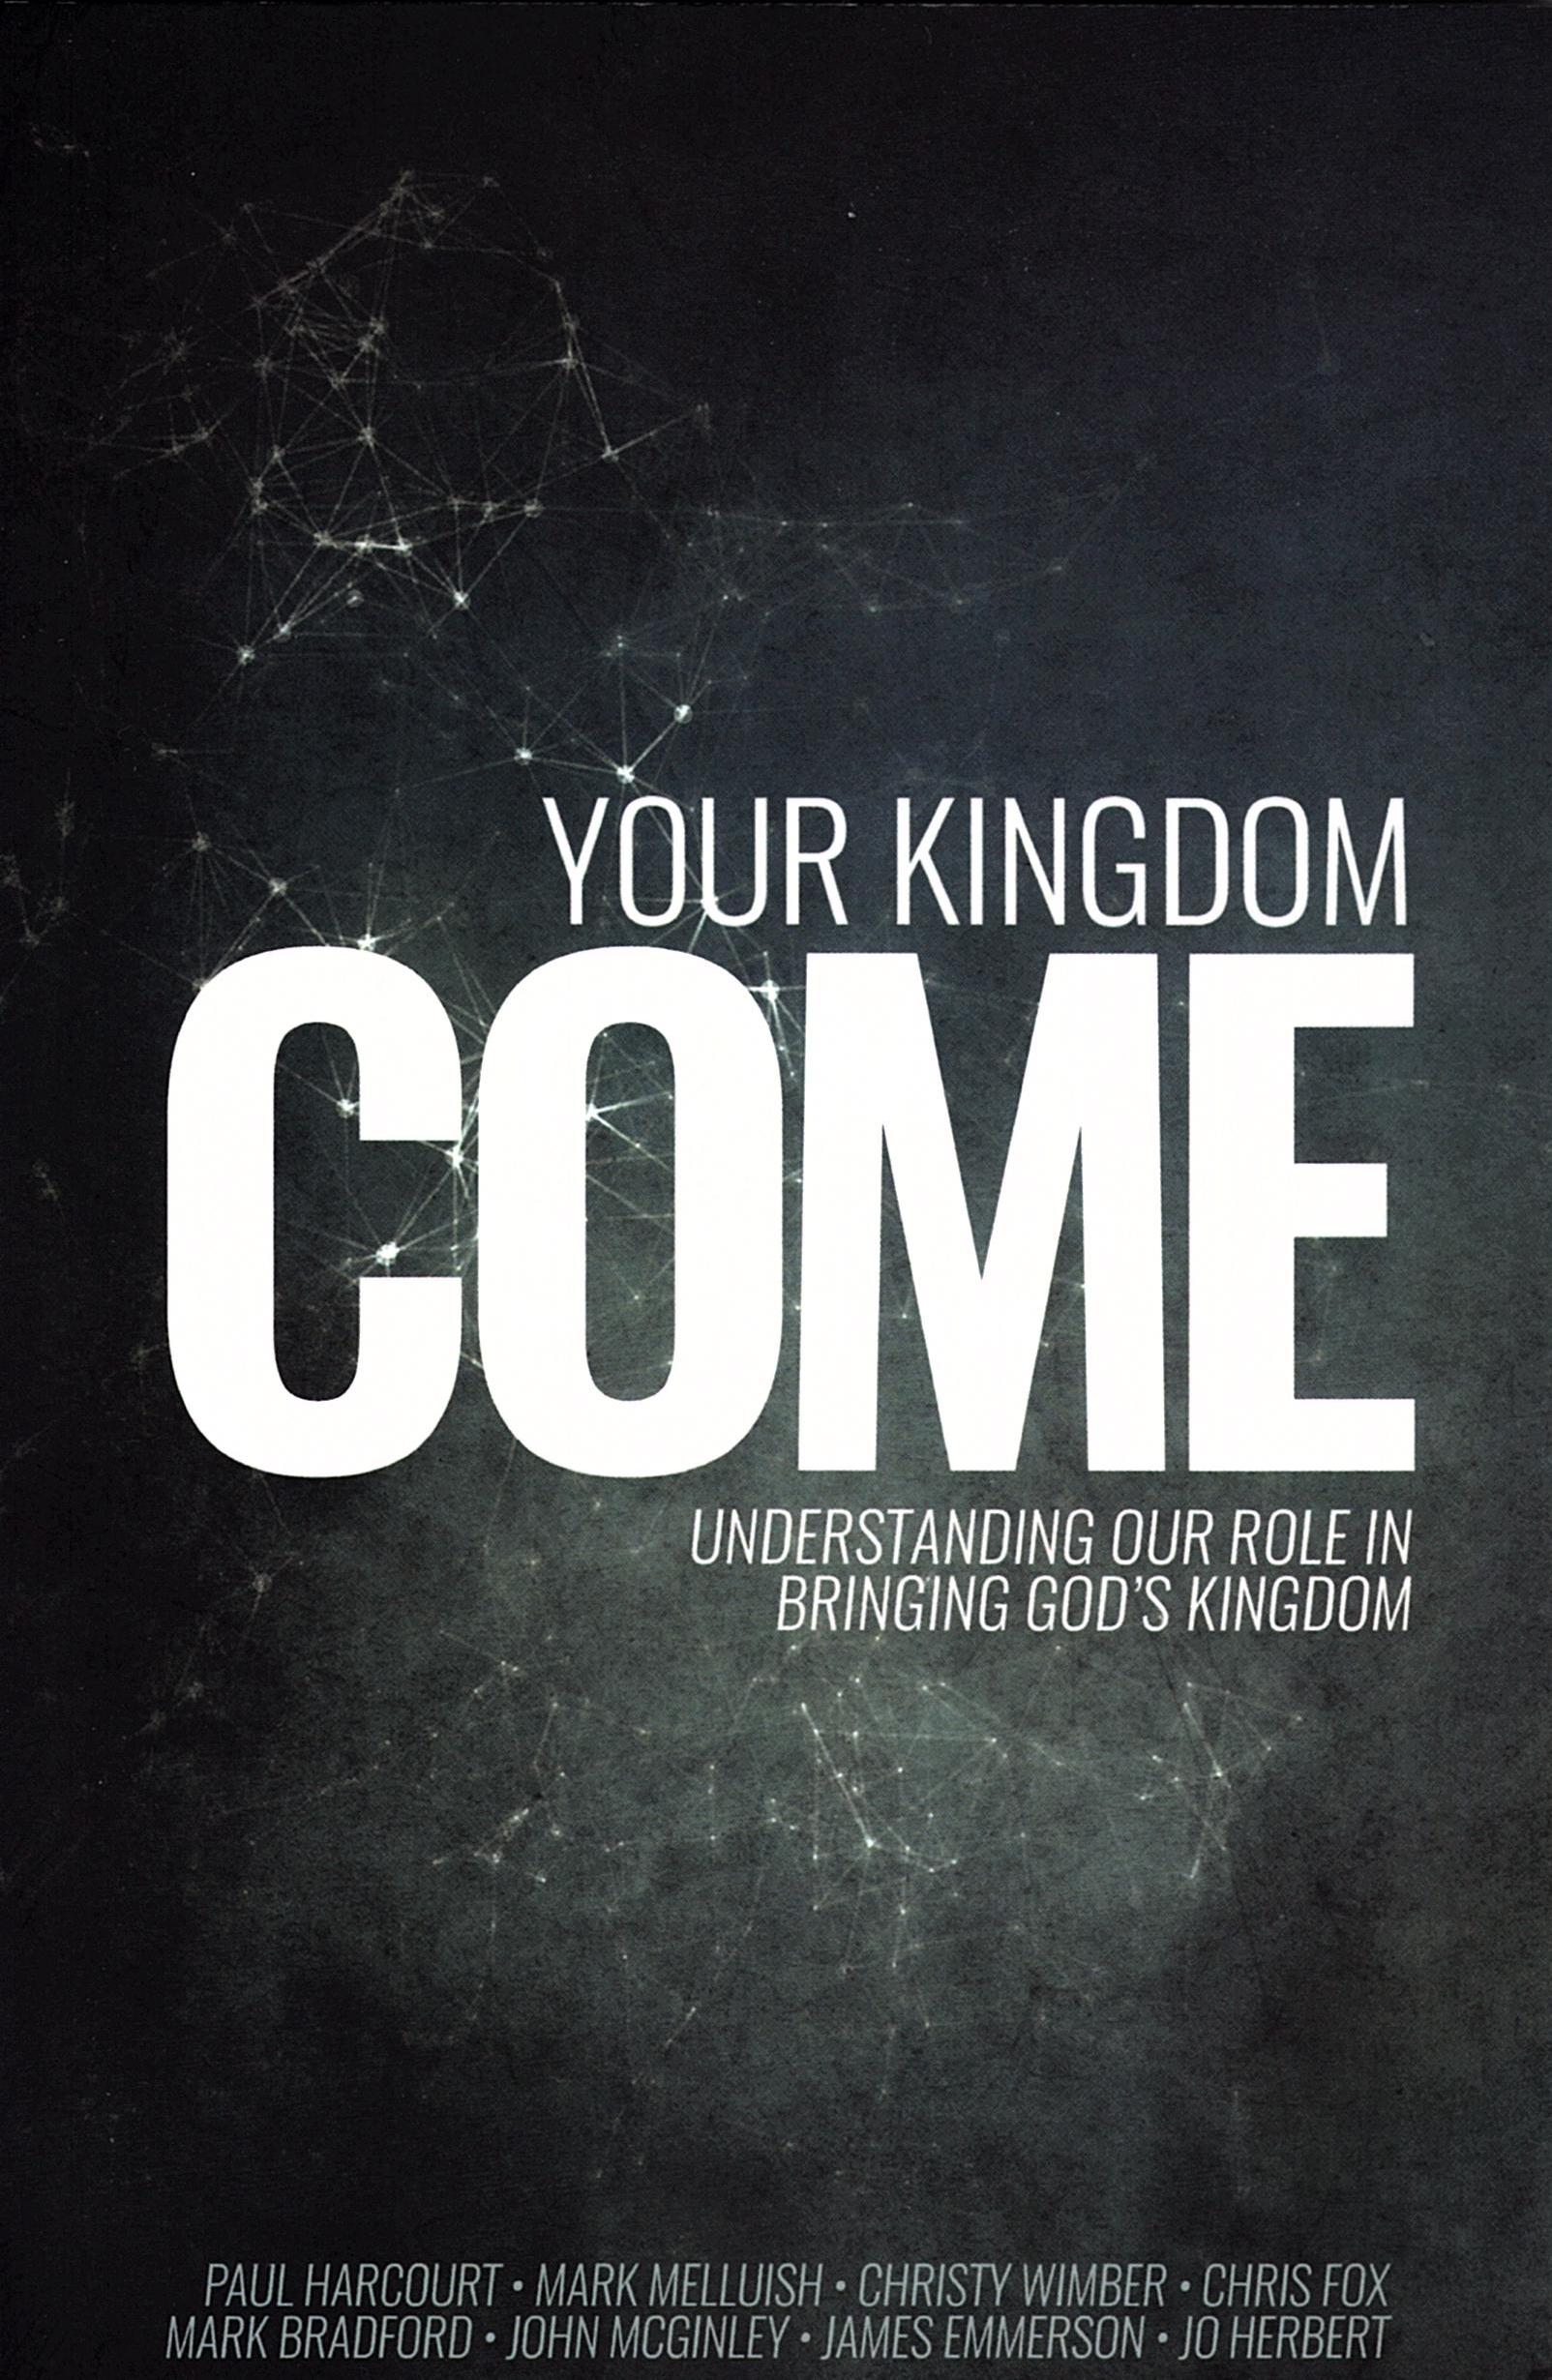 More information on Your Kingdom Come